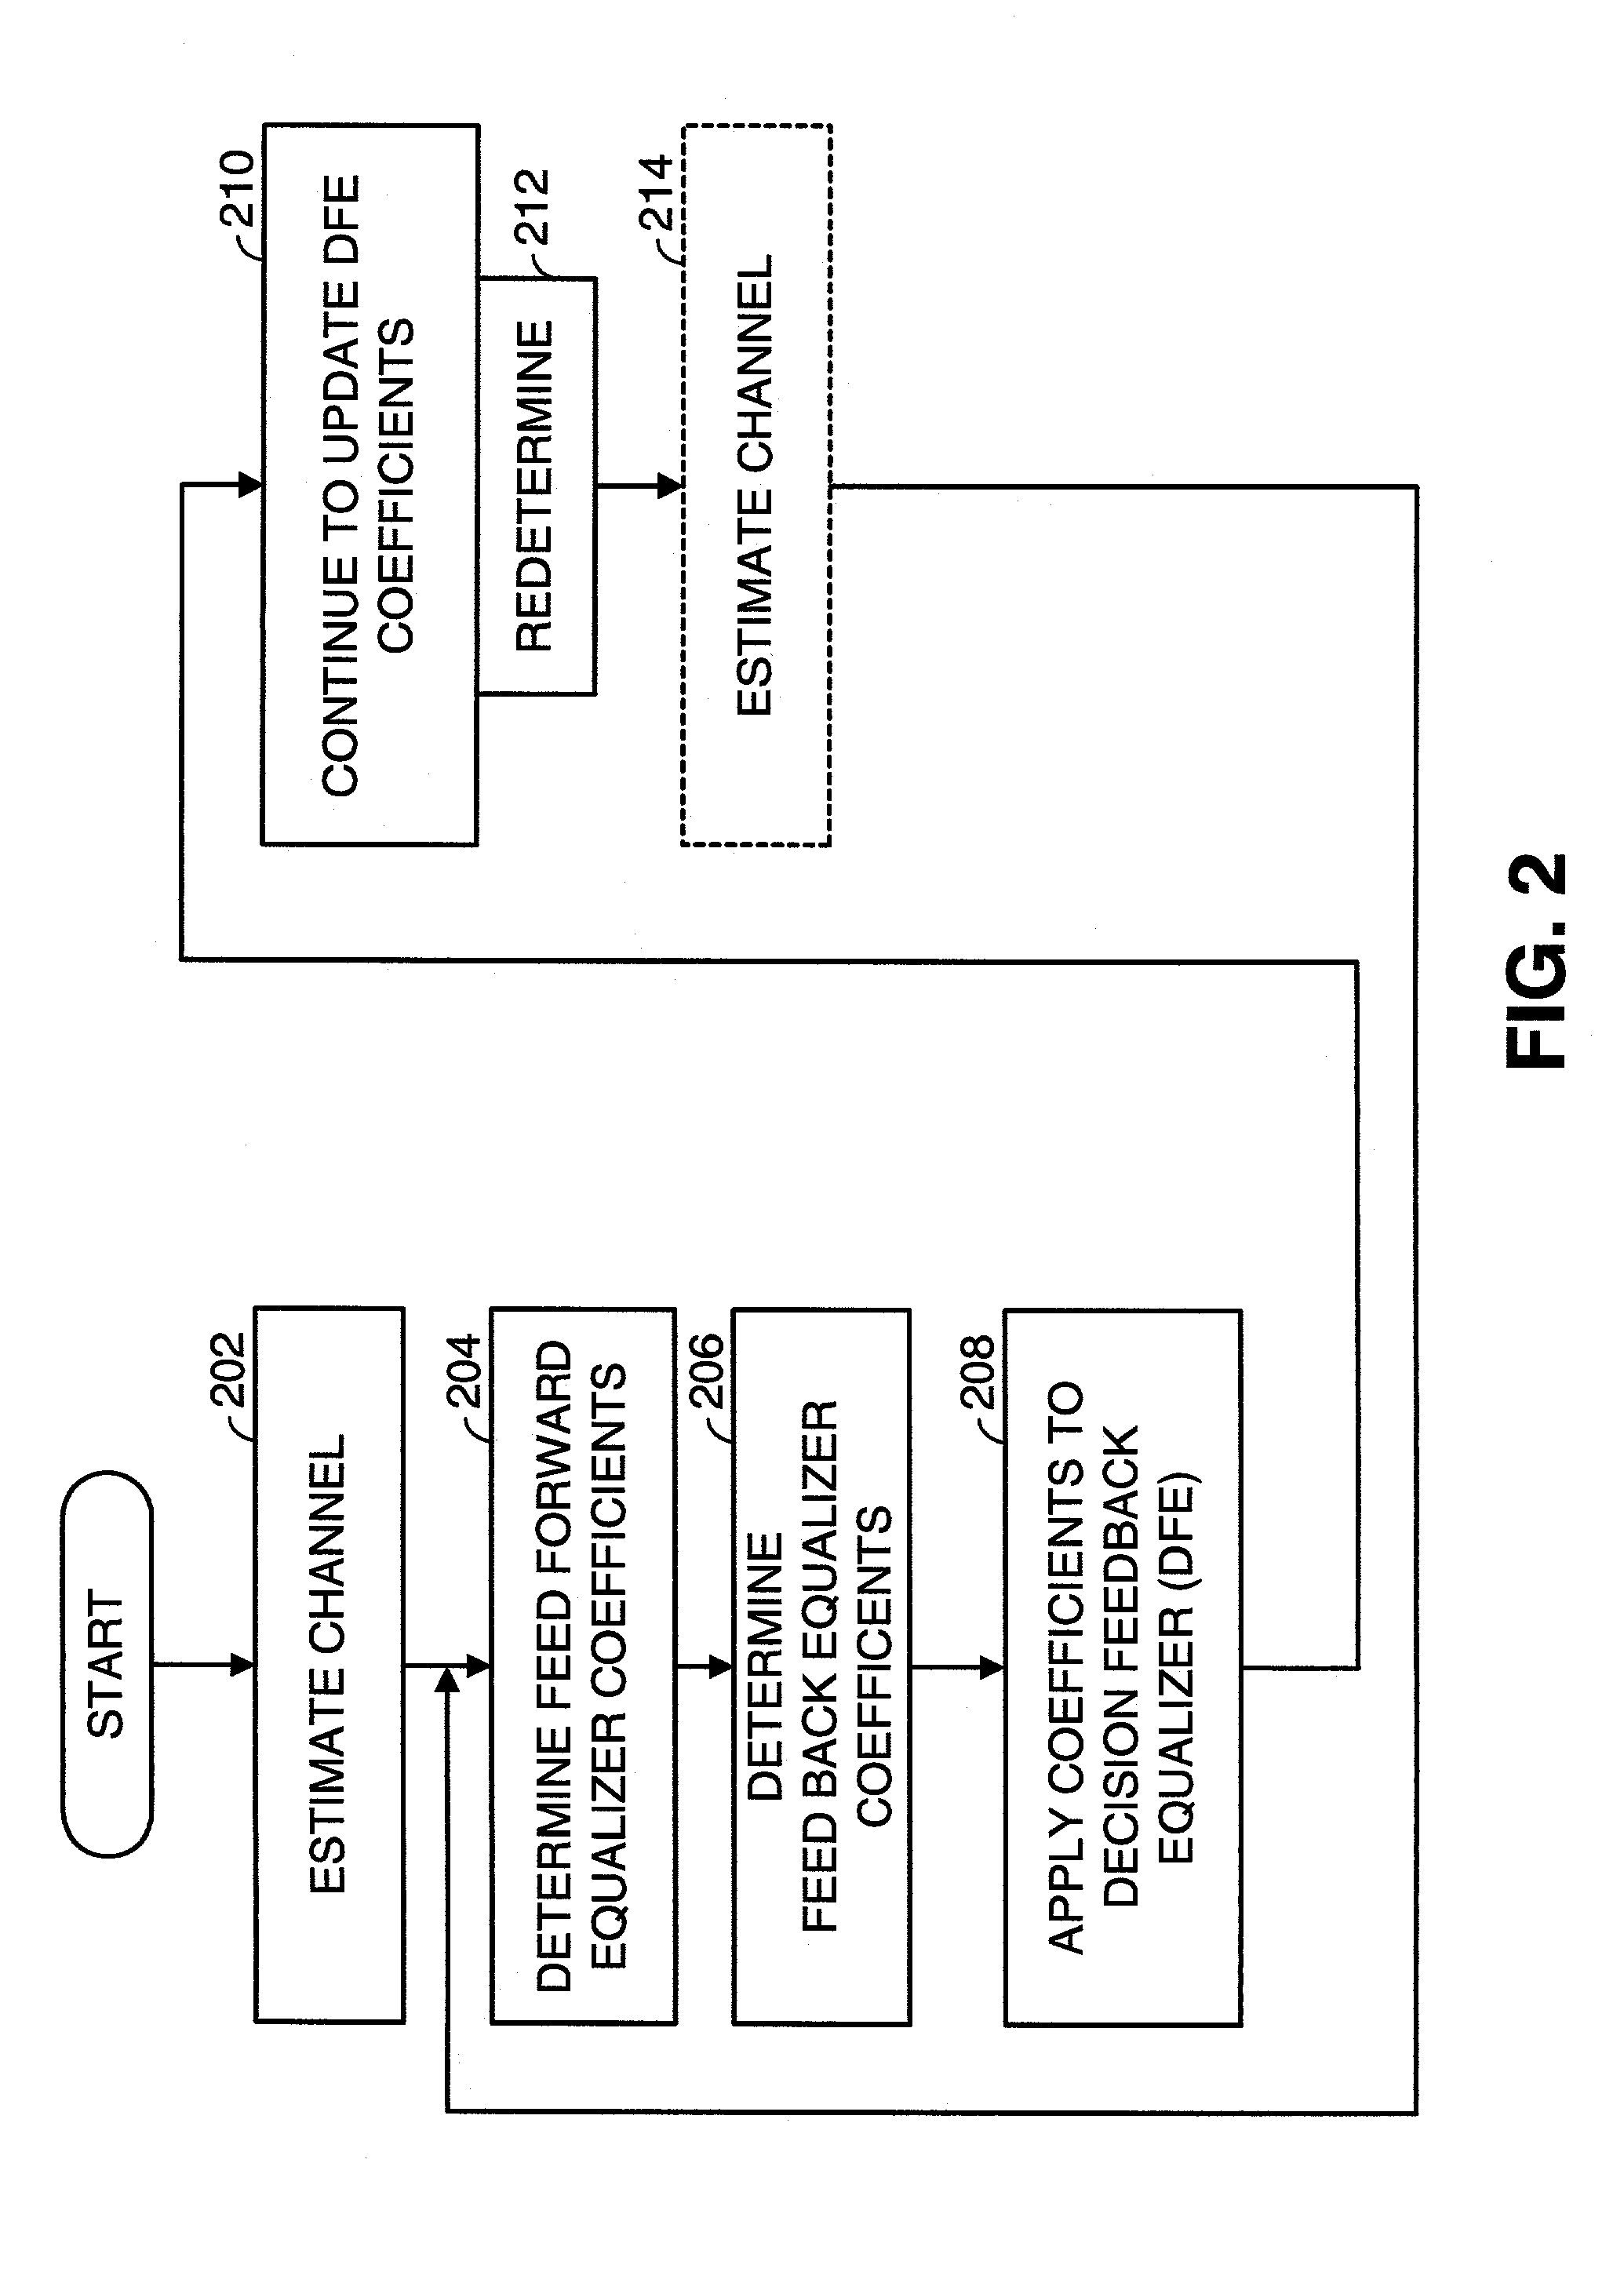 Fast computation of multi-input-multi-output decision feedback equalizer coefficients